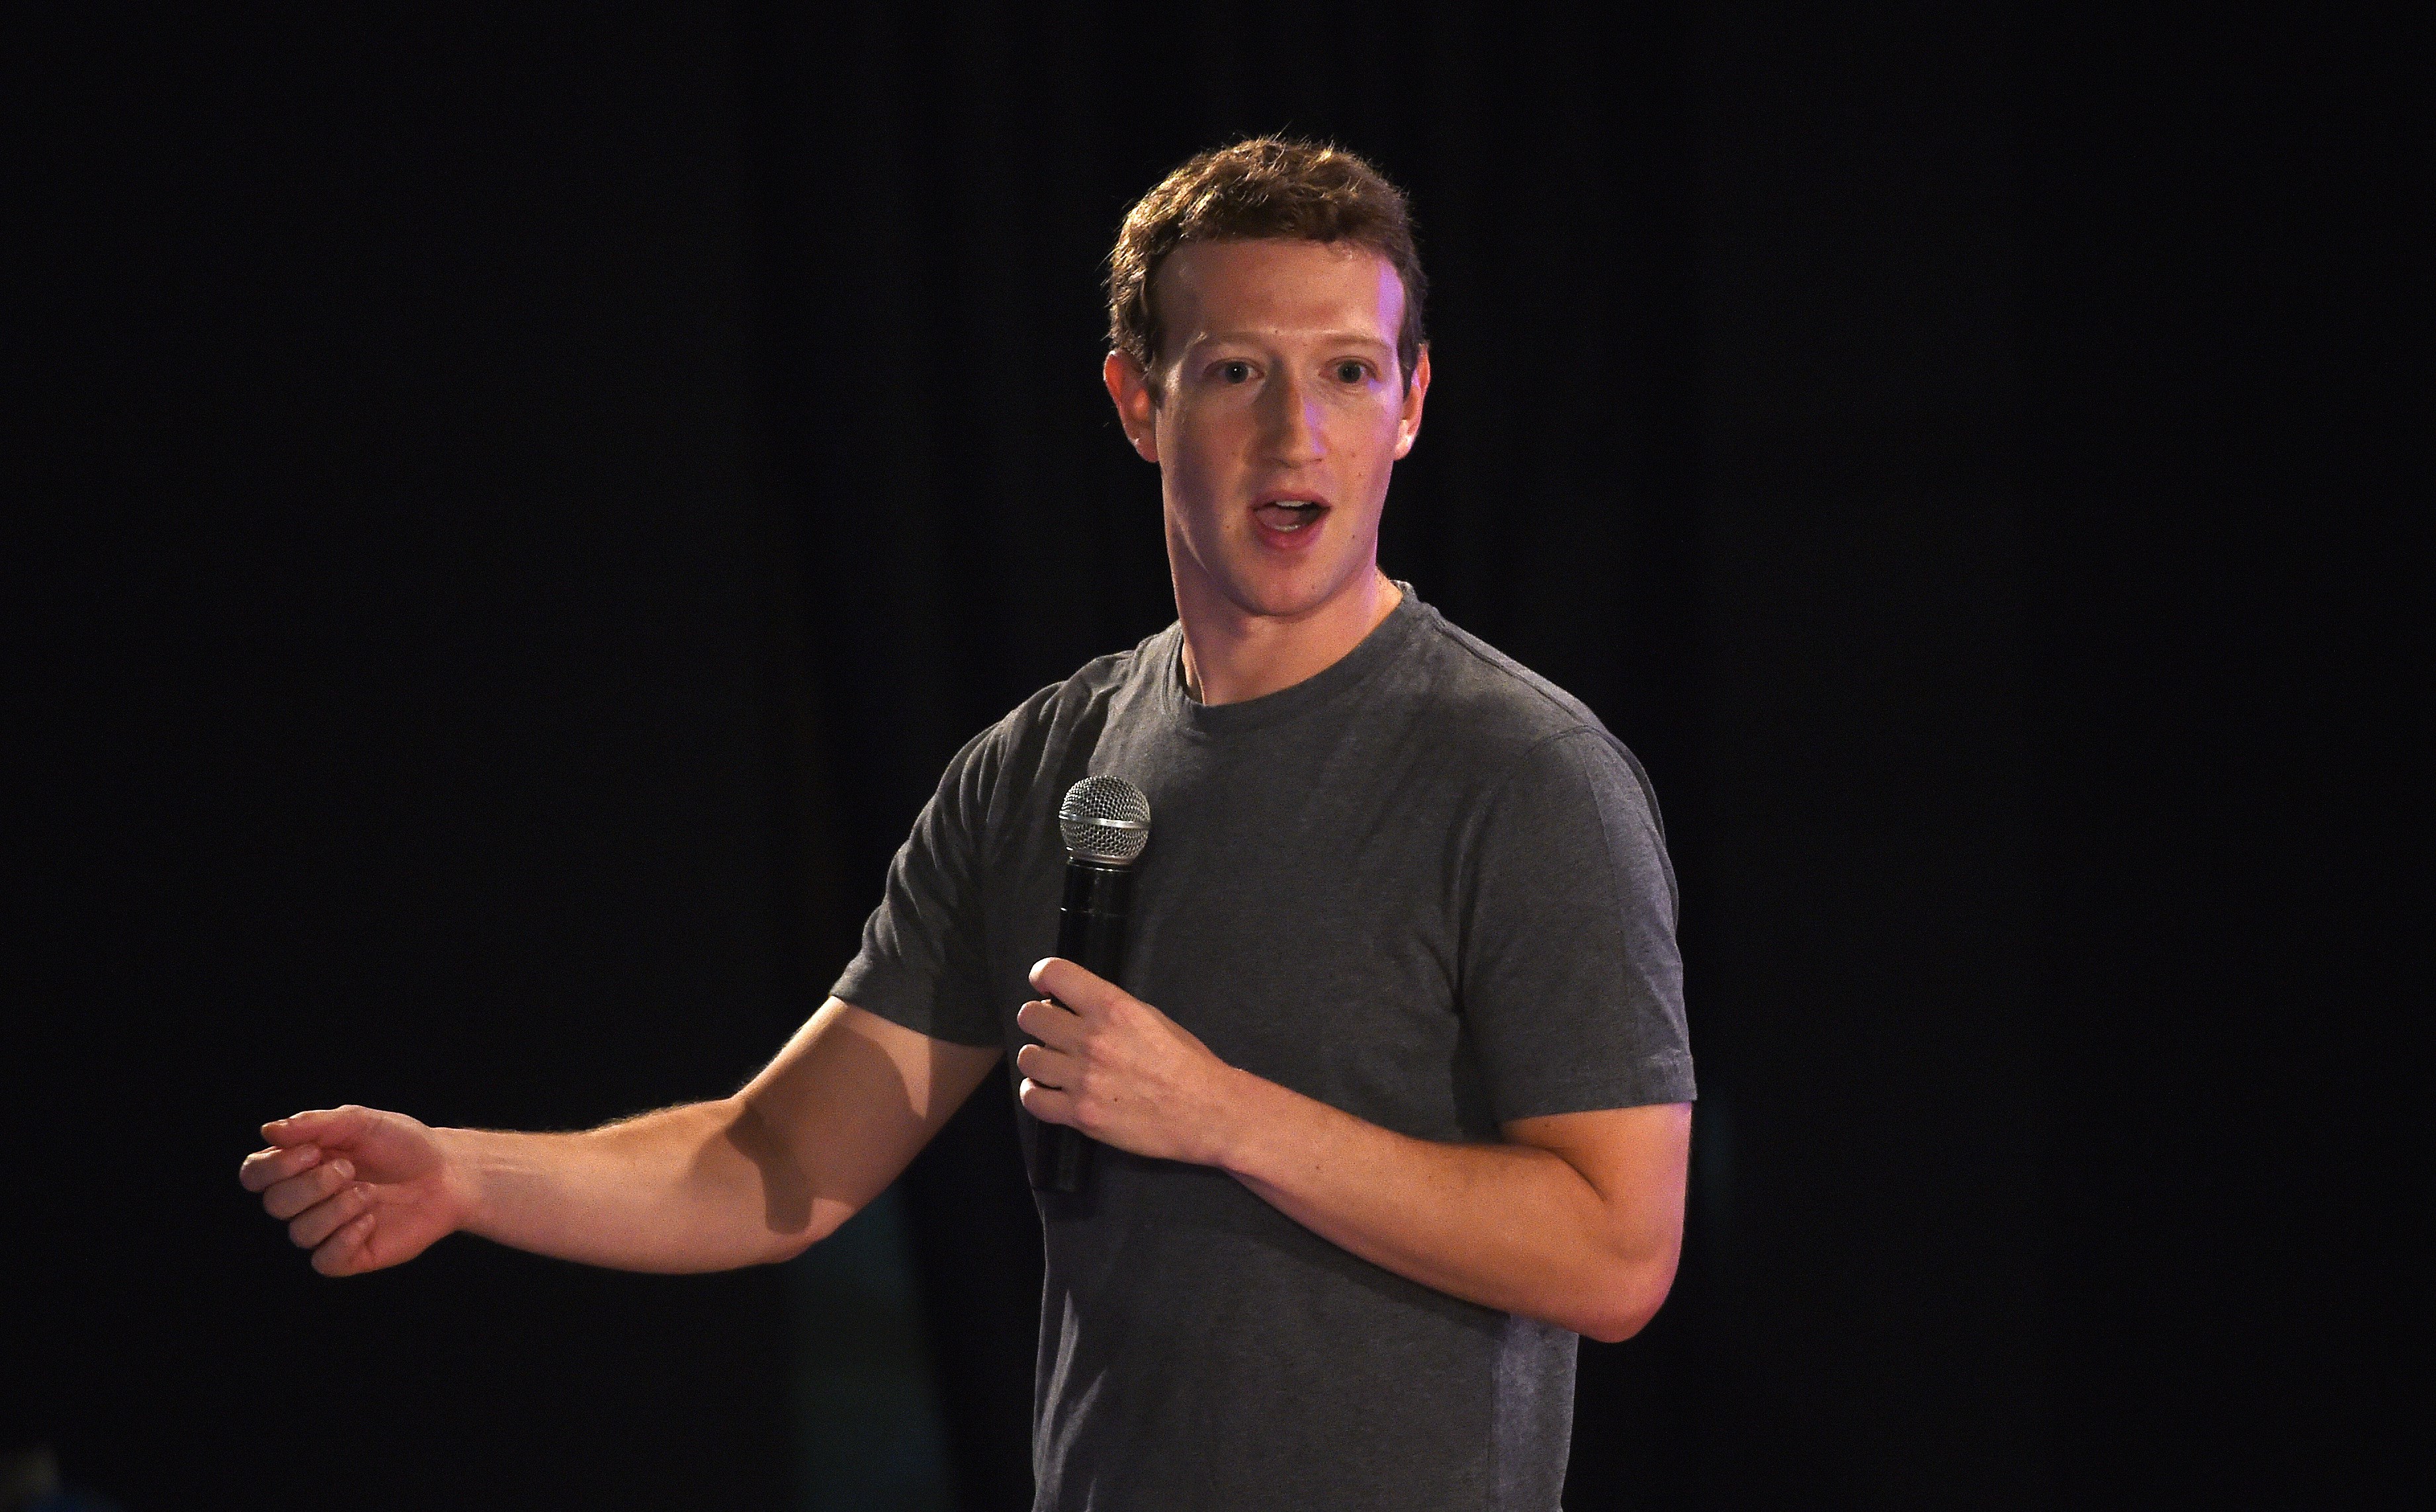 Facebook chief executive and founder Mark Zuckerberg speaks during a 'town-hall' meeting at the Indian Institute of Technology (IIT) in New Delhi on October 28, 2015. (Money Sharma—AFP/Getty Images)